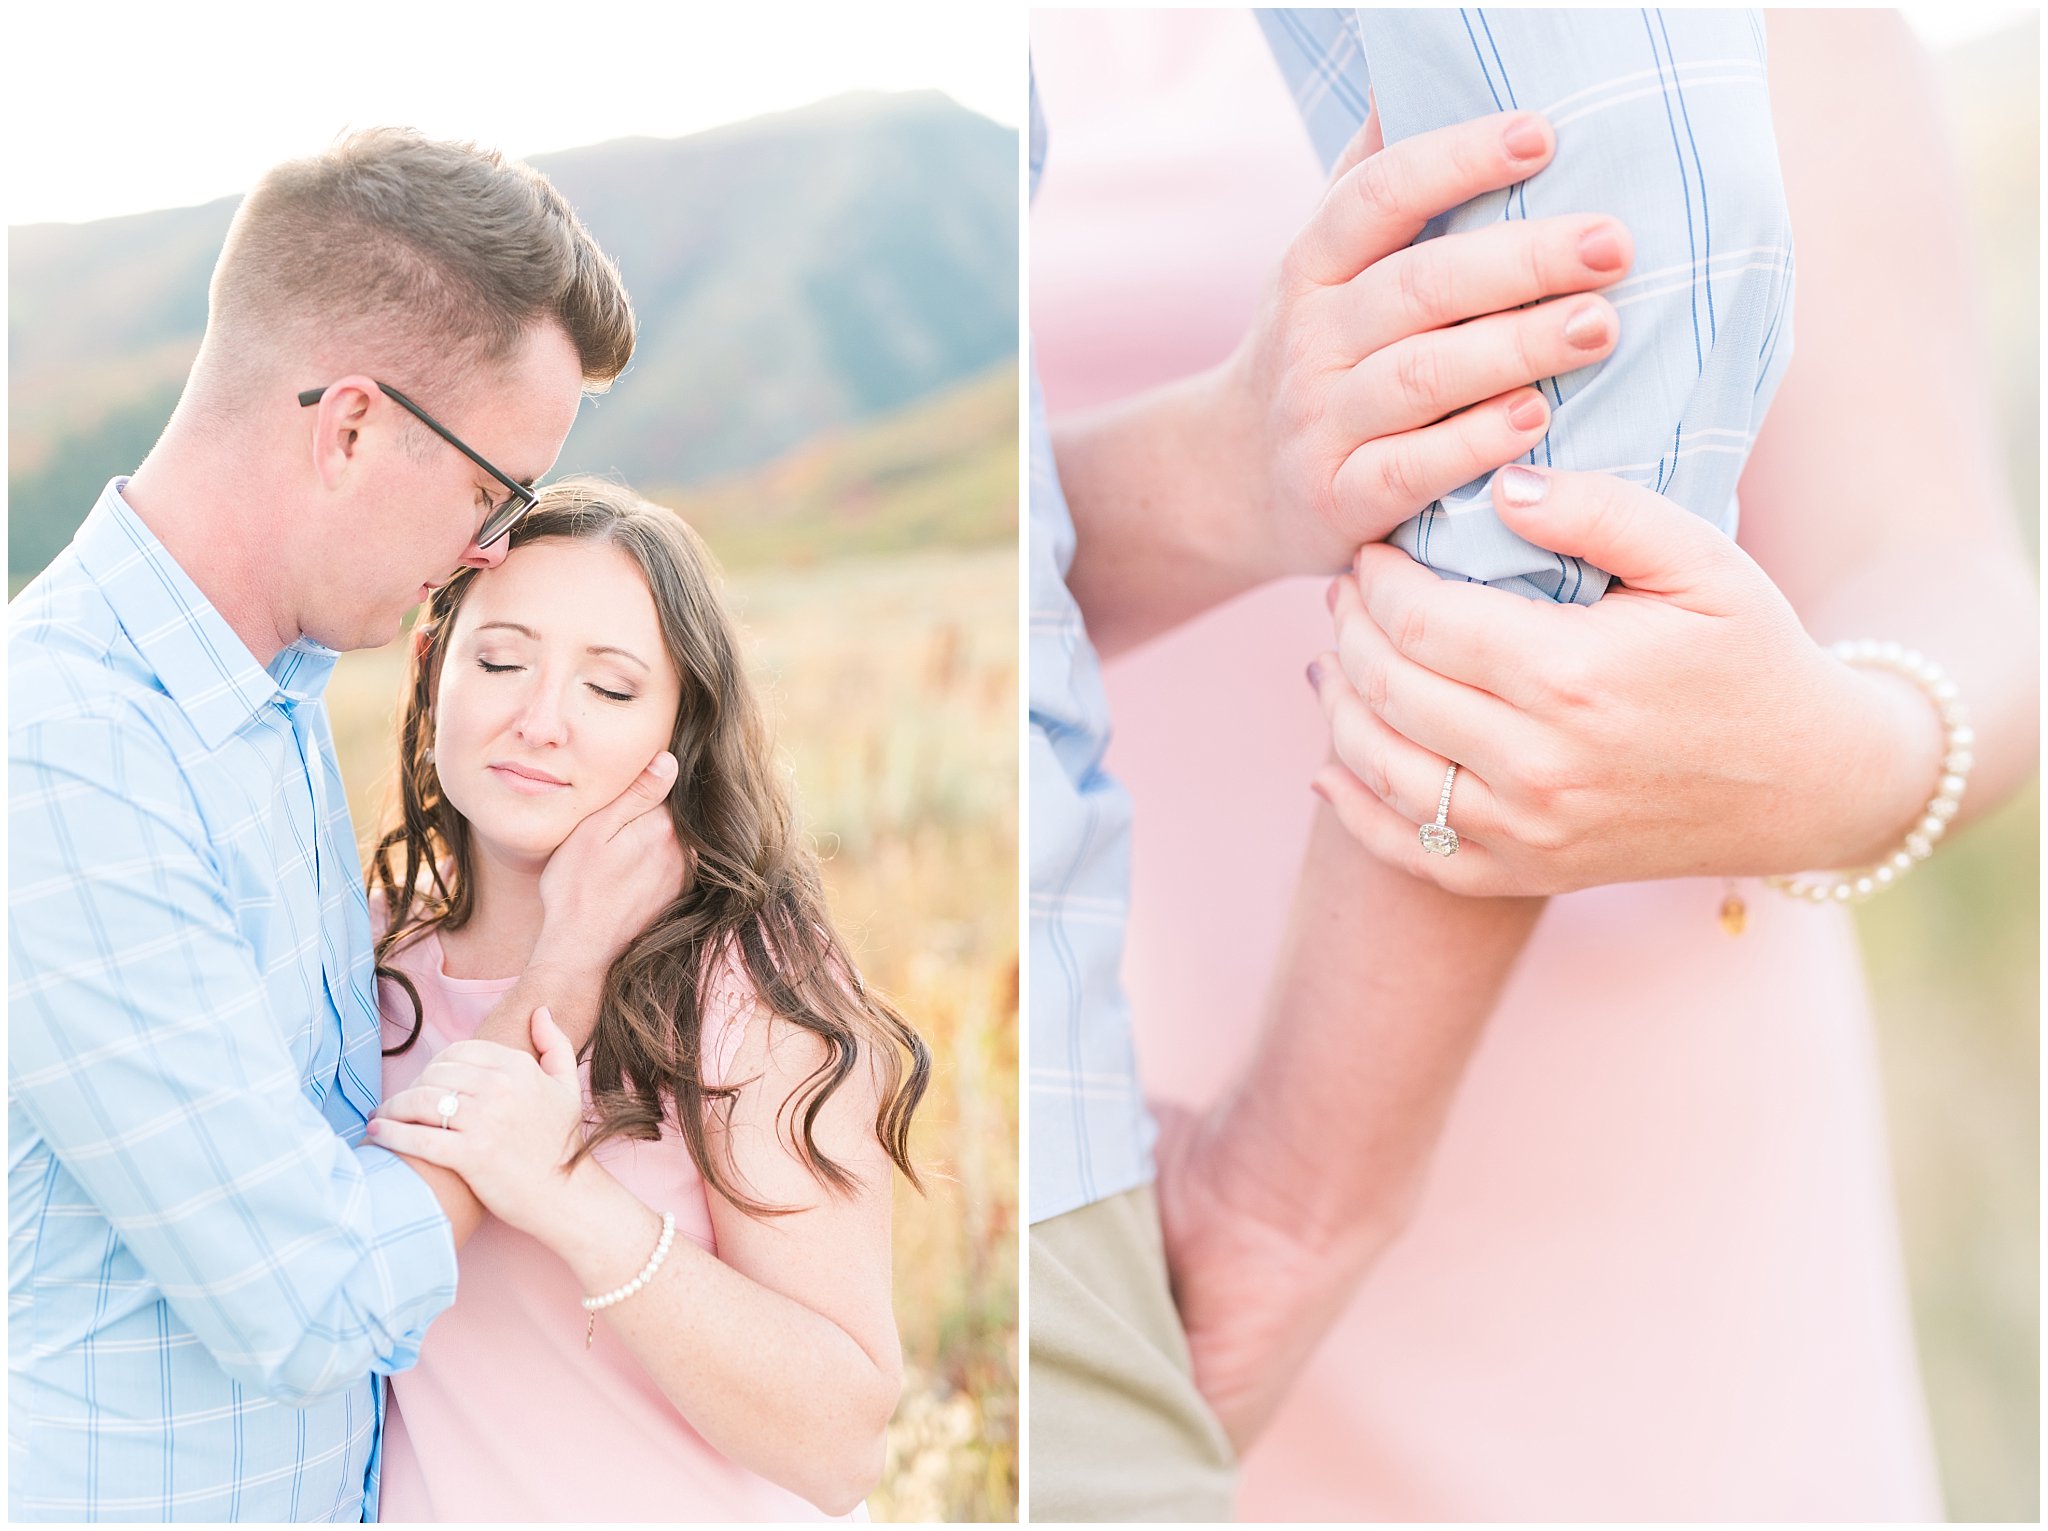 Couple in light blue shirt, tan pants and blush dress | Engagement in the Utah mountains surrounded by fall color | A Classic Snowbasin Fall Engagement Session | Jessie and Dallin Photography